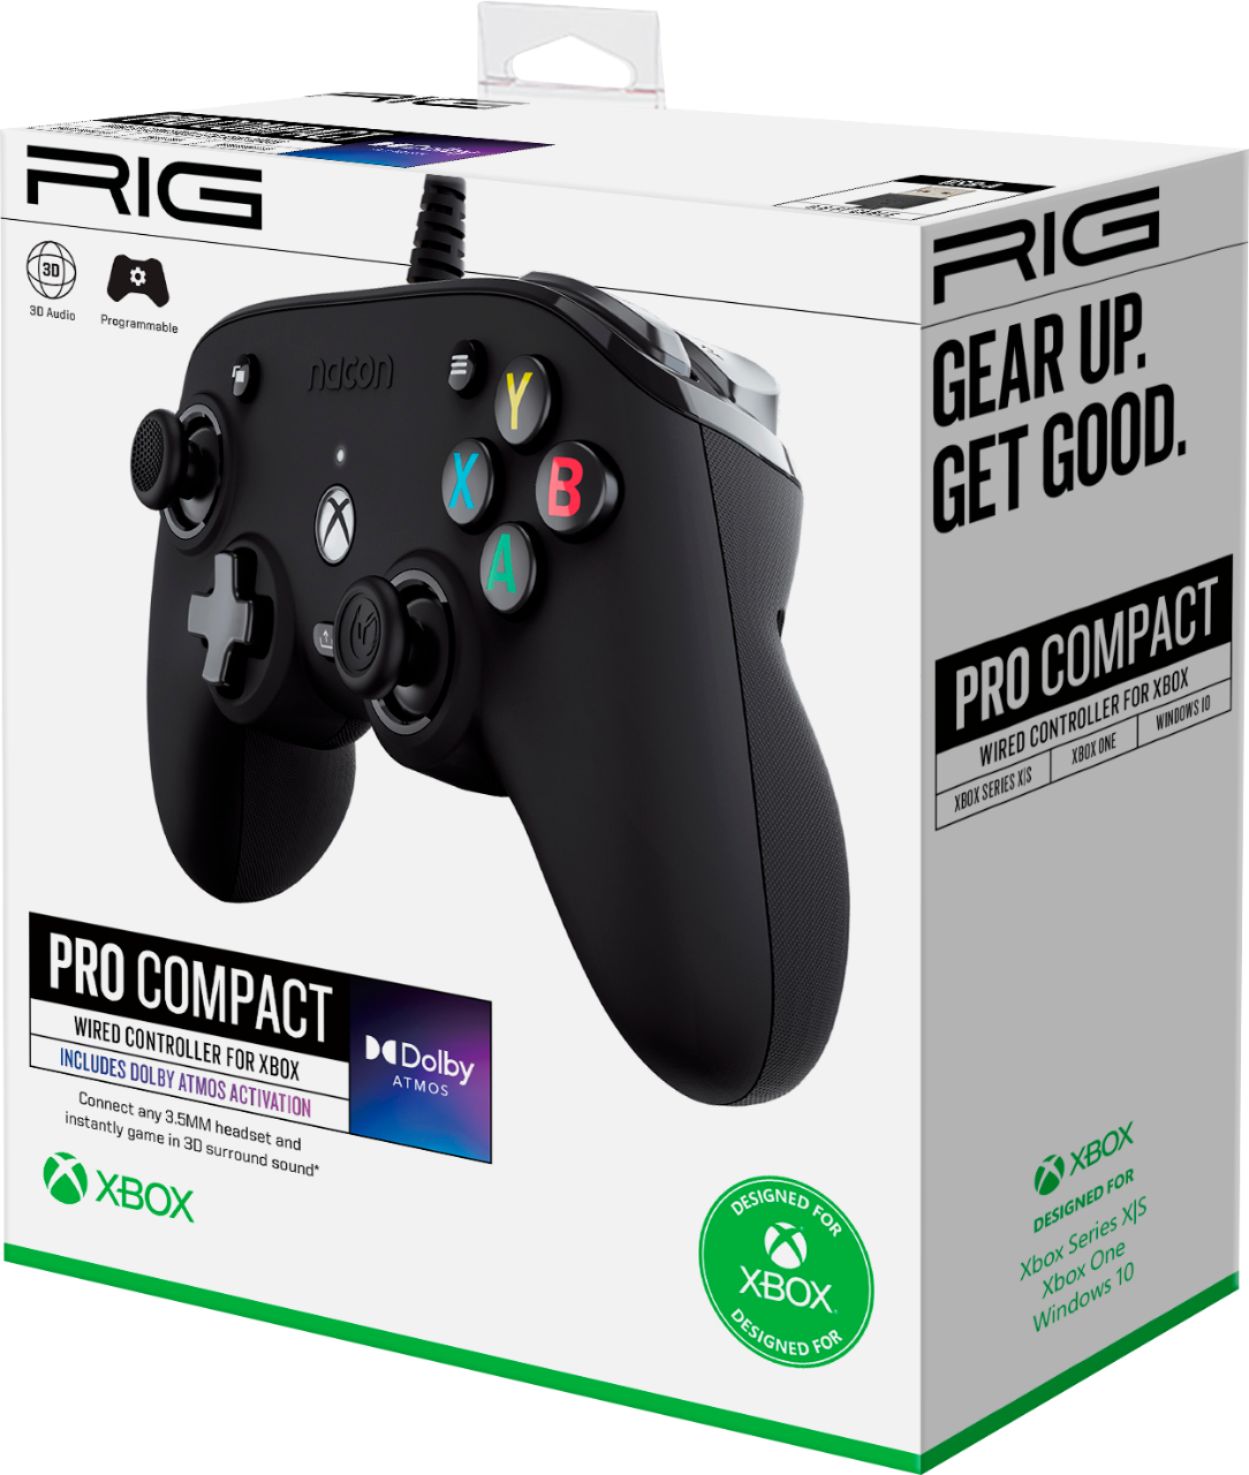 Angle View: RIG - Pro Controller for Xbox Series X|S|One with Dolby Atmos - Black